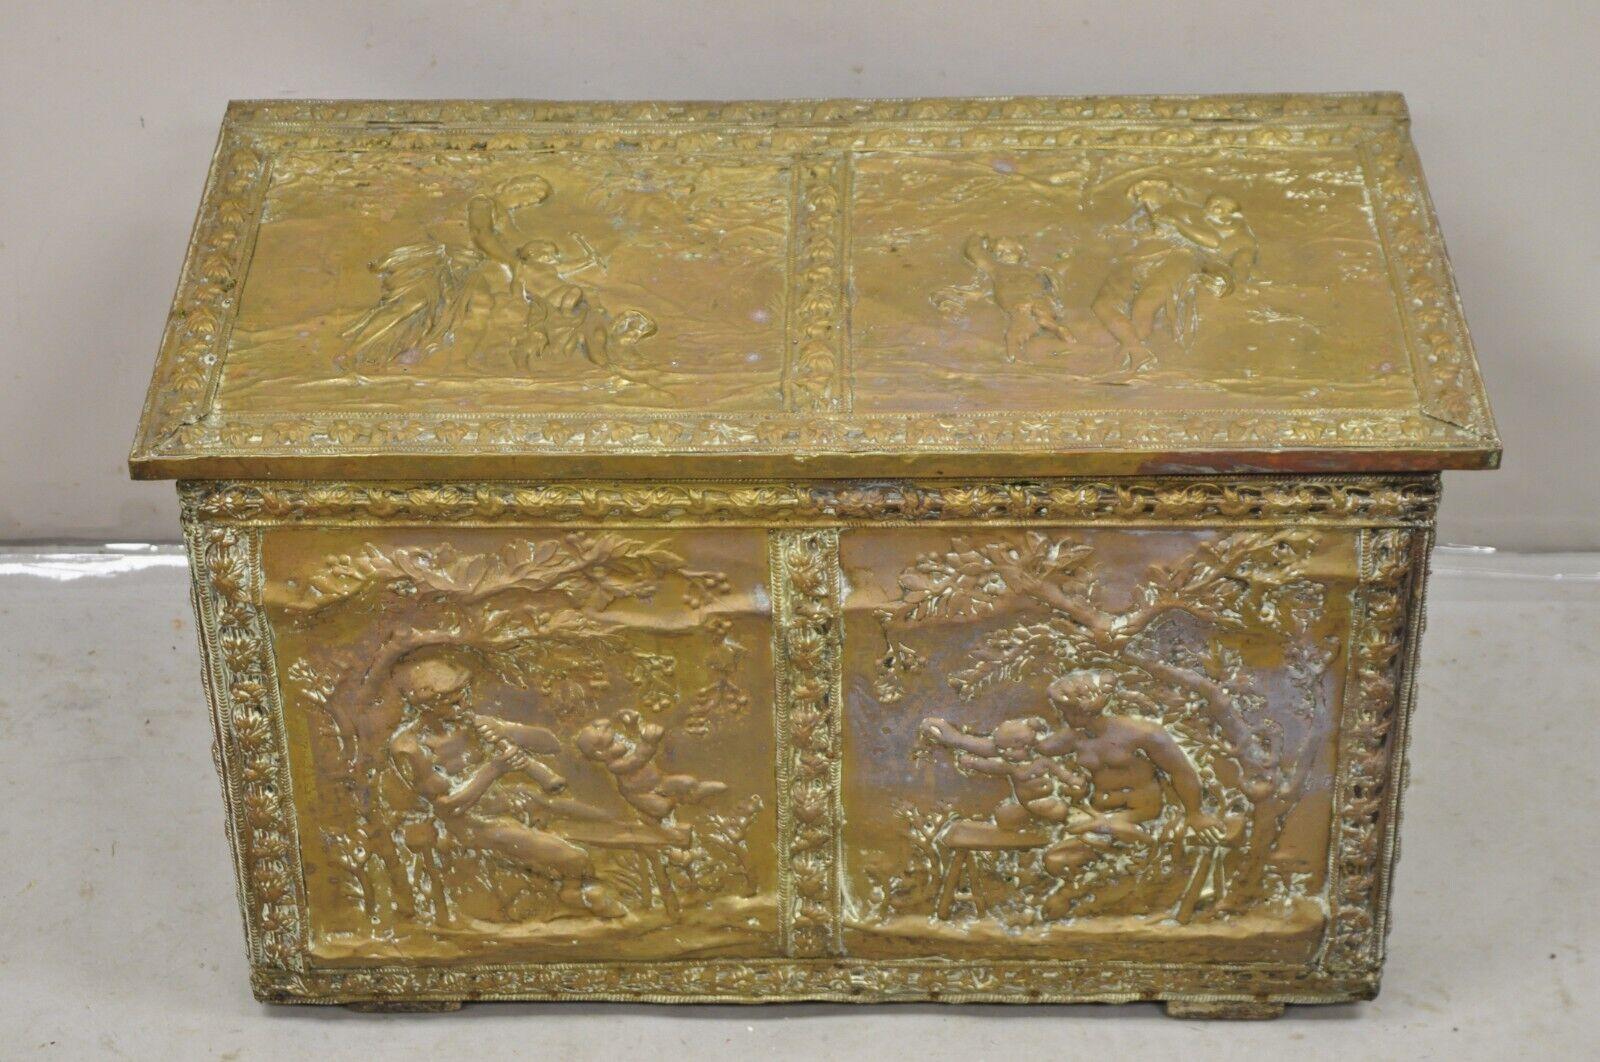 19th C. English Victorian Figural Repousse Brass Clad Coal Bin Storage Chest. Item features Various repousse scenes throughout, wooden case, very nice antique item. Circa 19th Century. Measurements: 19